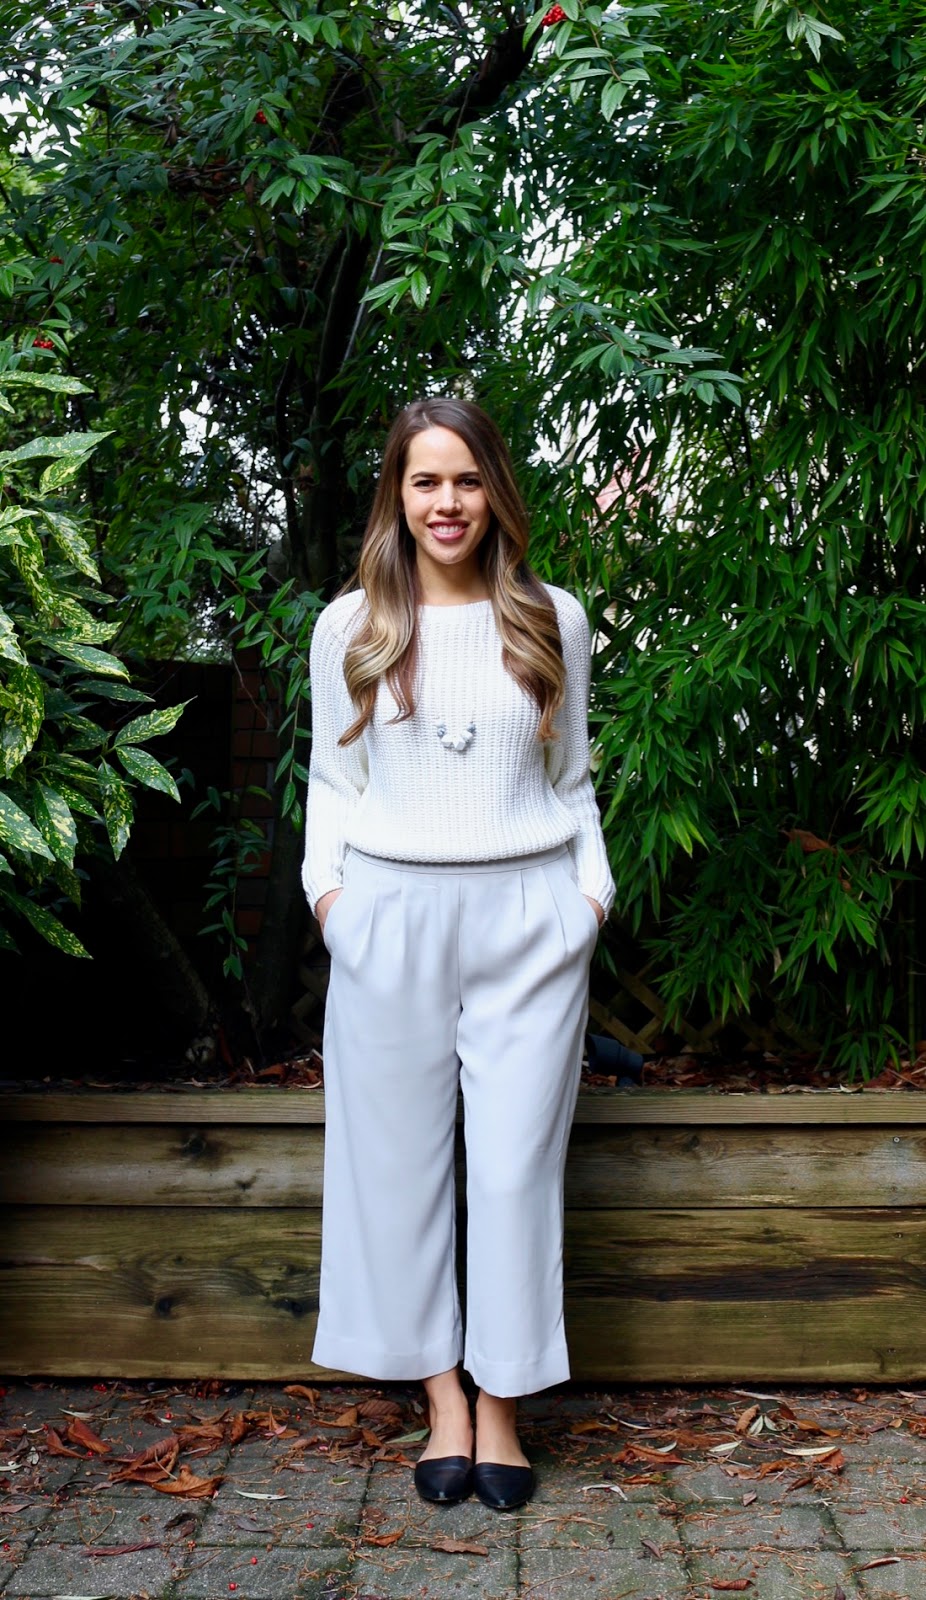 Jules in Flats - Winter White Culotte Outfit (Business Casual Winter Workwear on a Budget)